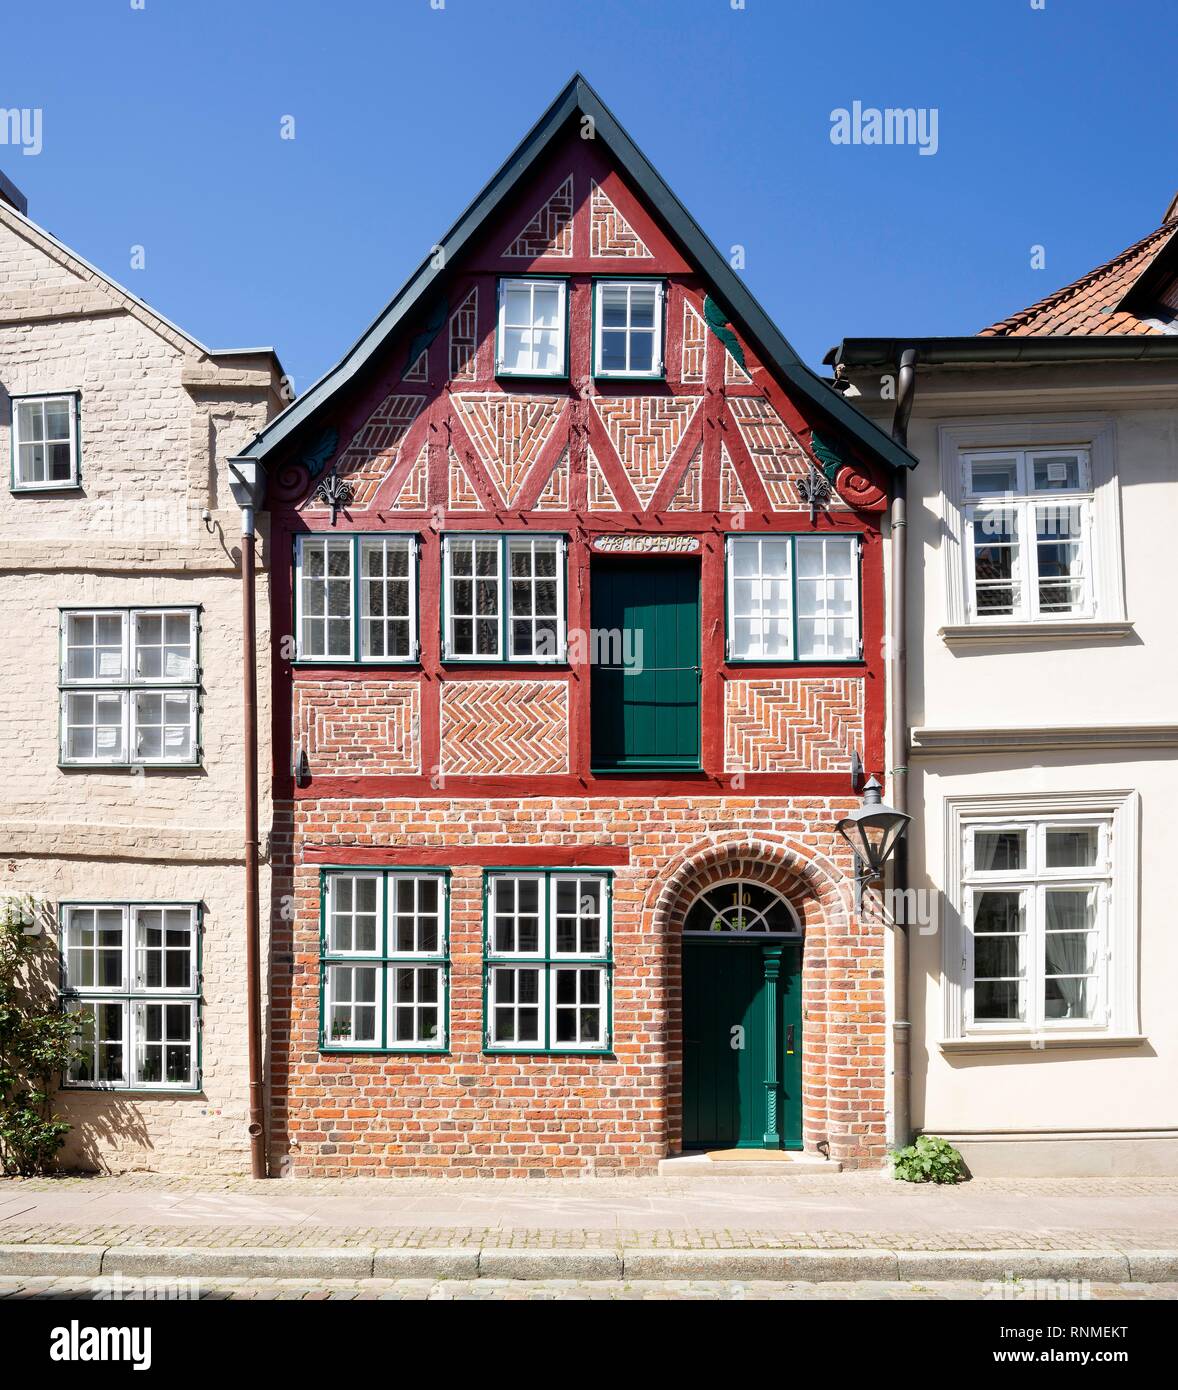 Historic town house in the street Auf dem Meere, Old Town, Lüneburg, Lower Saxony, Germany Stock Photo